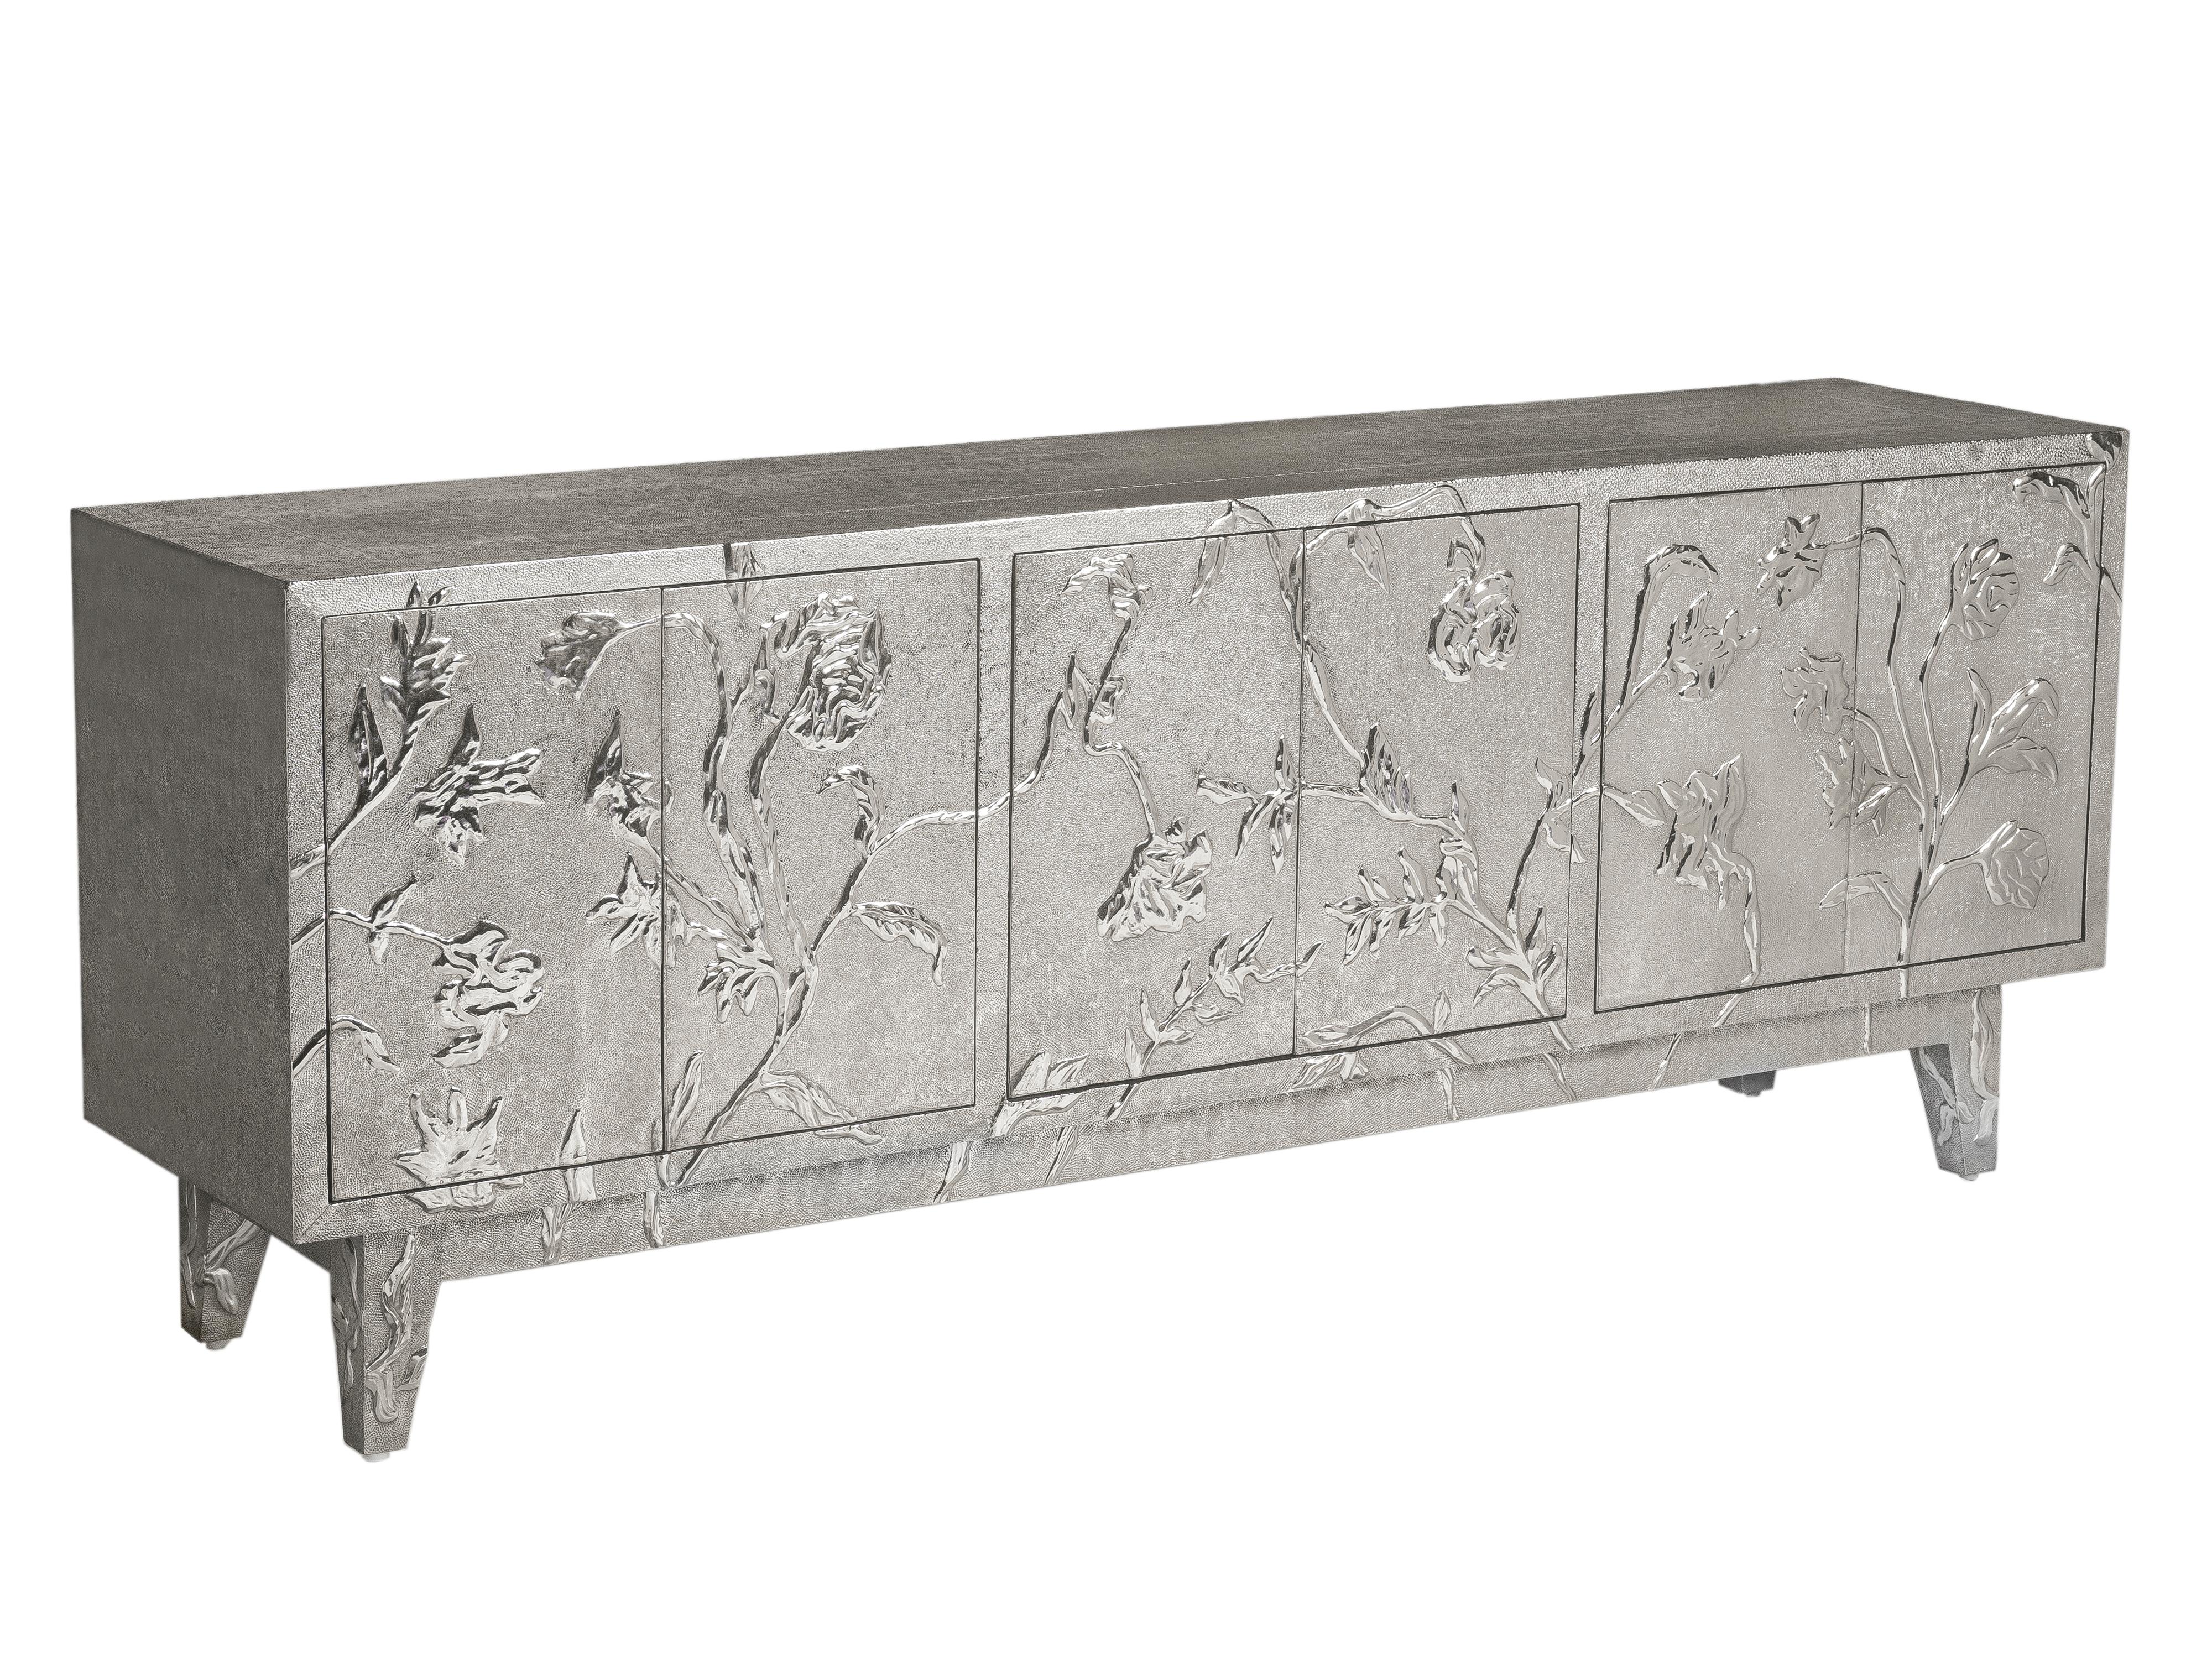 Hand-Carved Art Deco Chest of Drawers in Floral Design by Stephanie Odegard For Sale